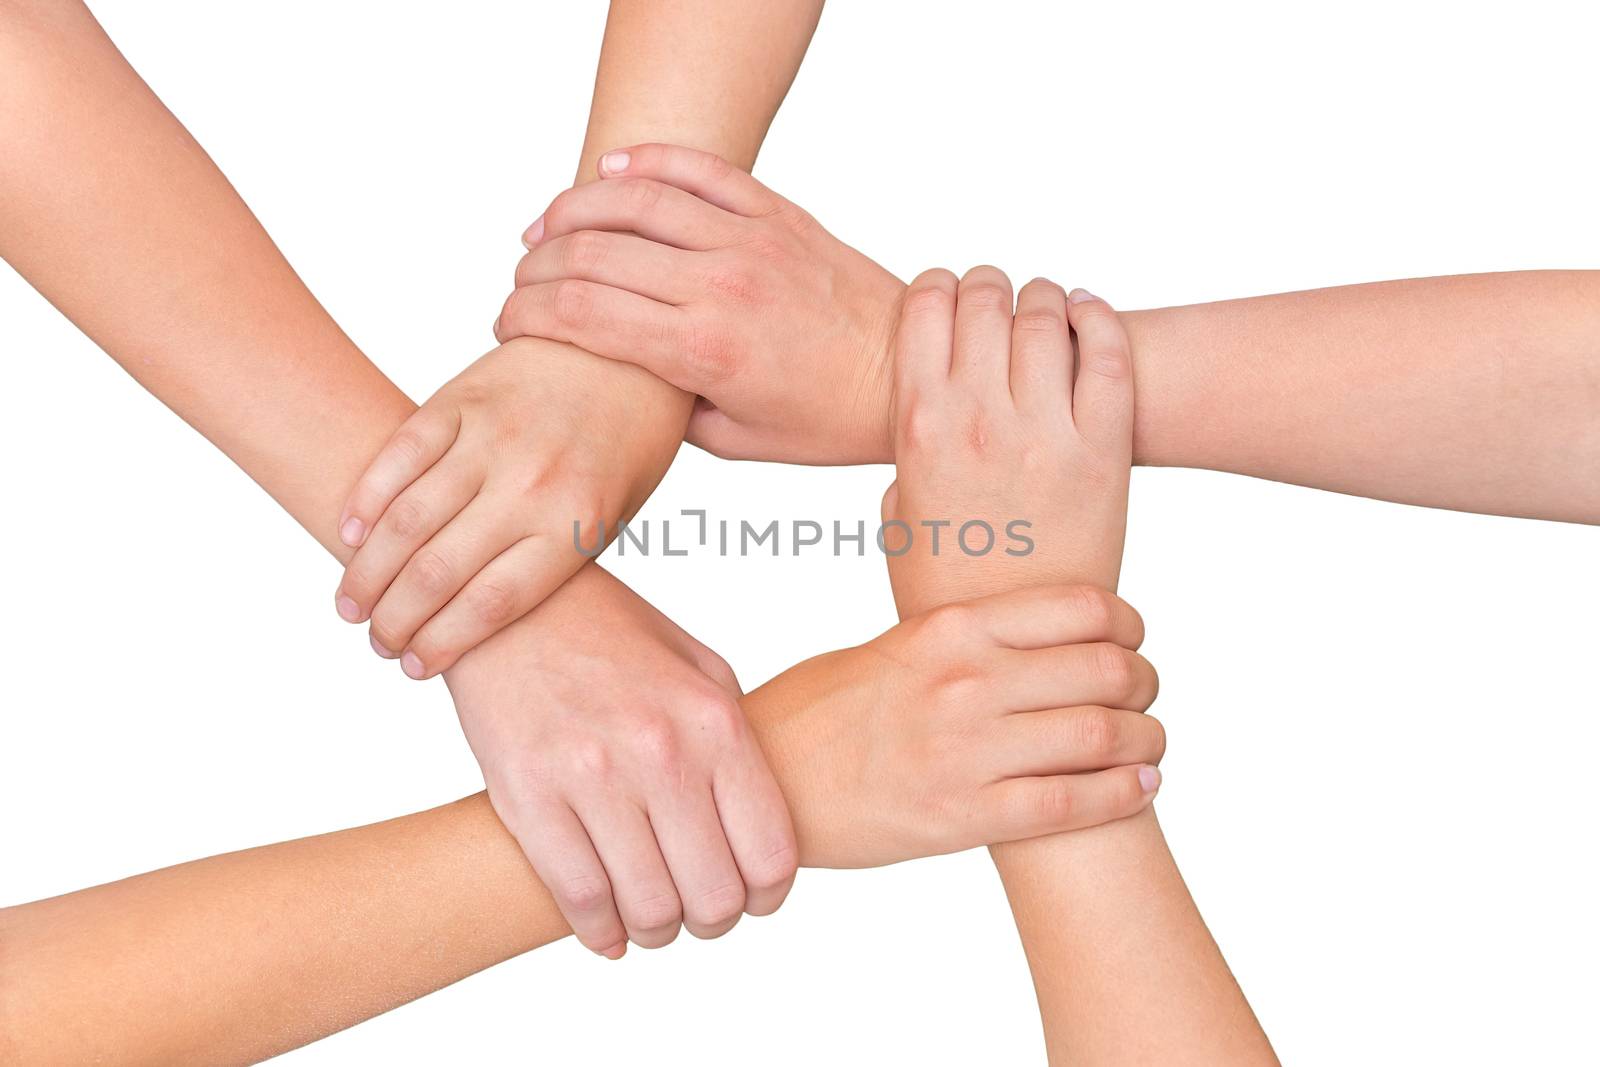 Five arms of children holding together on white background by BenSchonewille